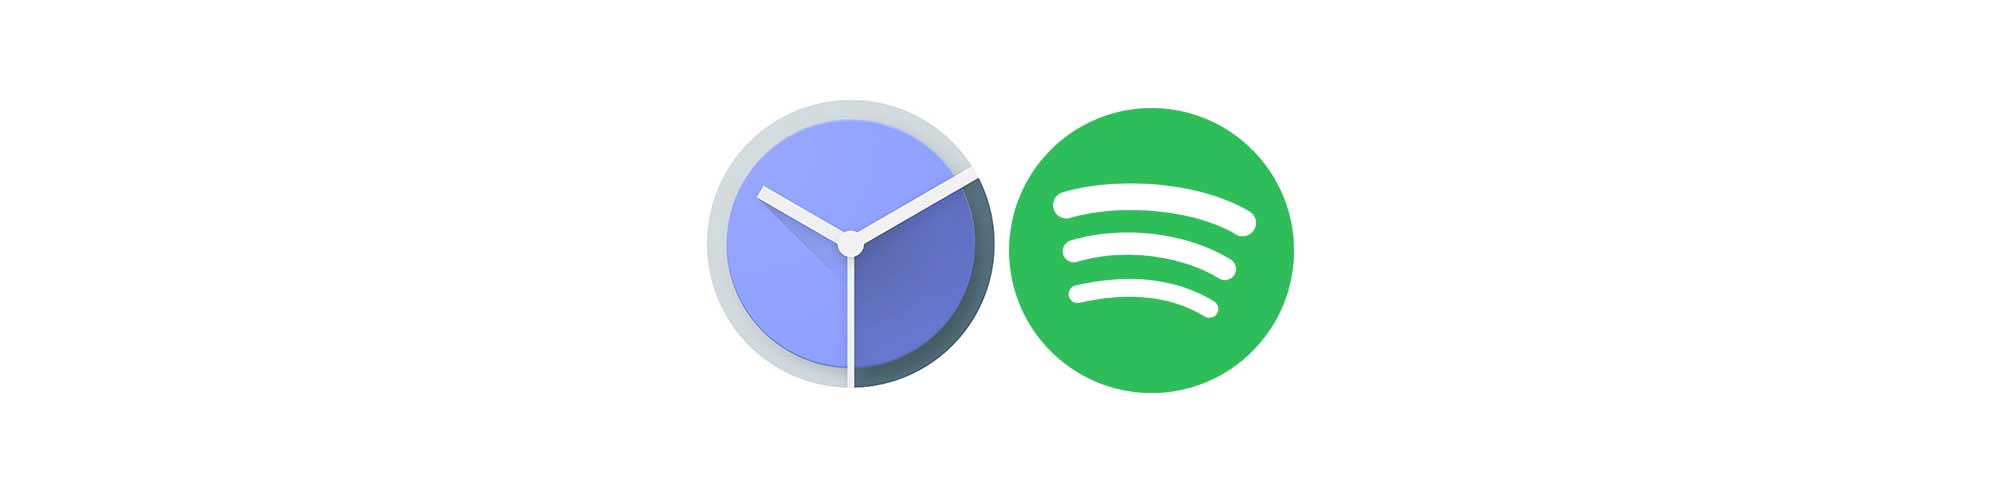    Android Clock  Google        Spotify